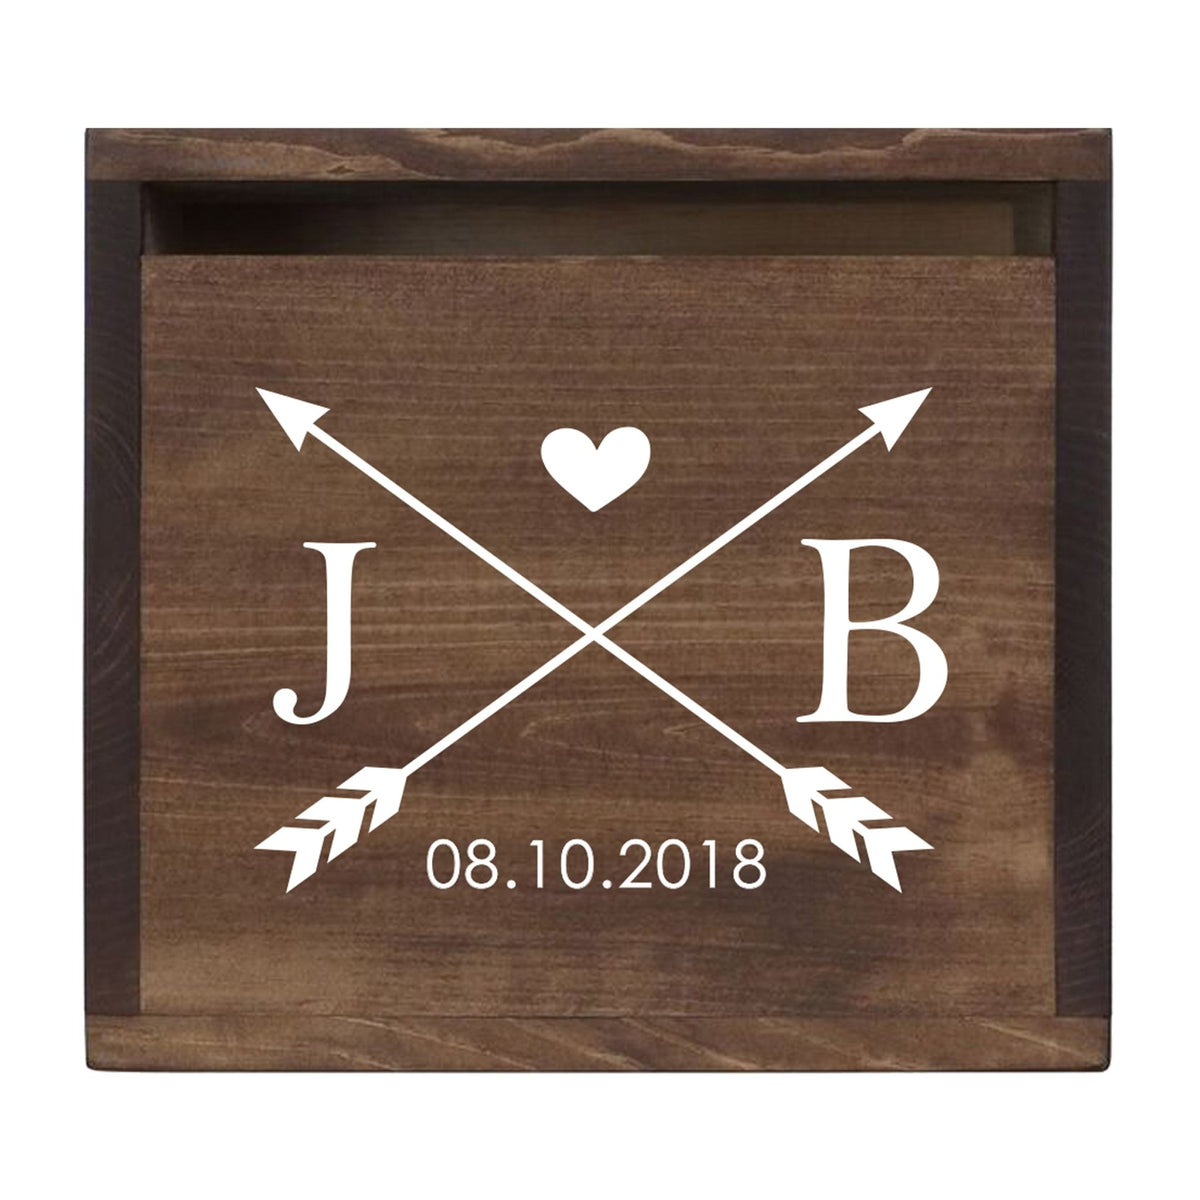 Personalized Wooden Card Box for Wedding Ceremonies, Venues, Receptions, Bridal Showers, and Engagement Parties 13.5x12 - J&amp;B (Arrows) - LifeSong Milestones